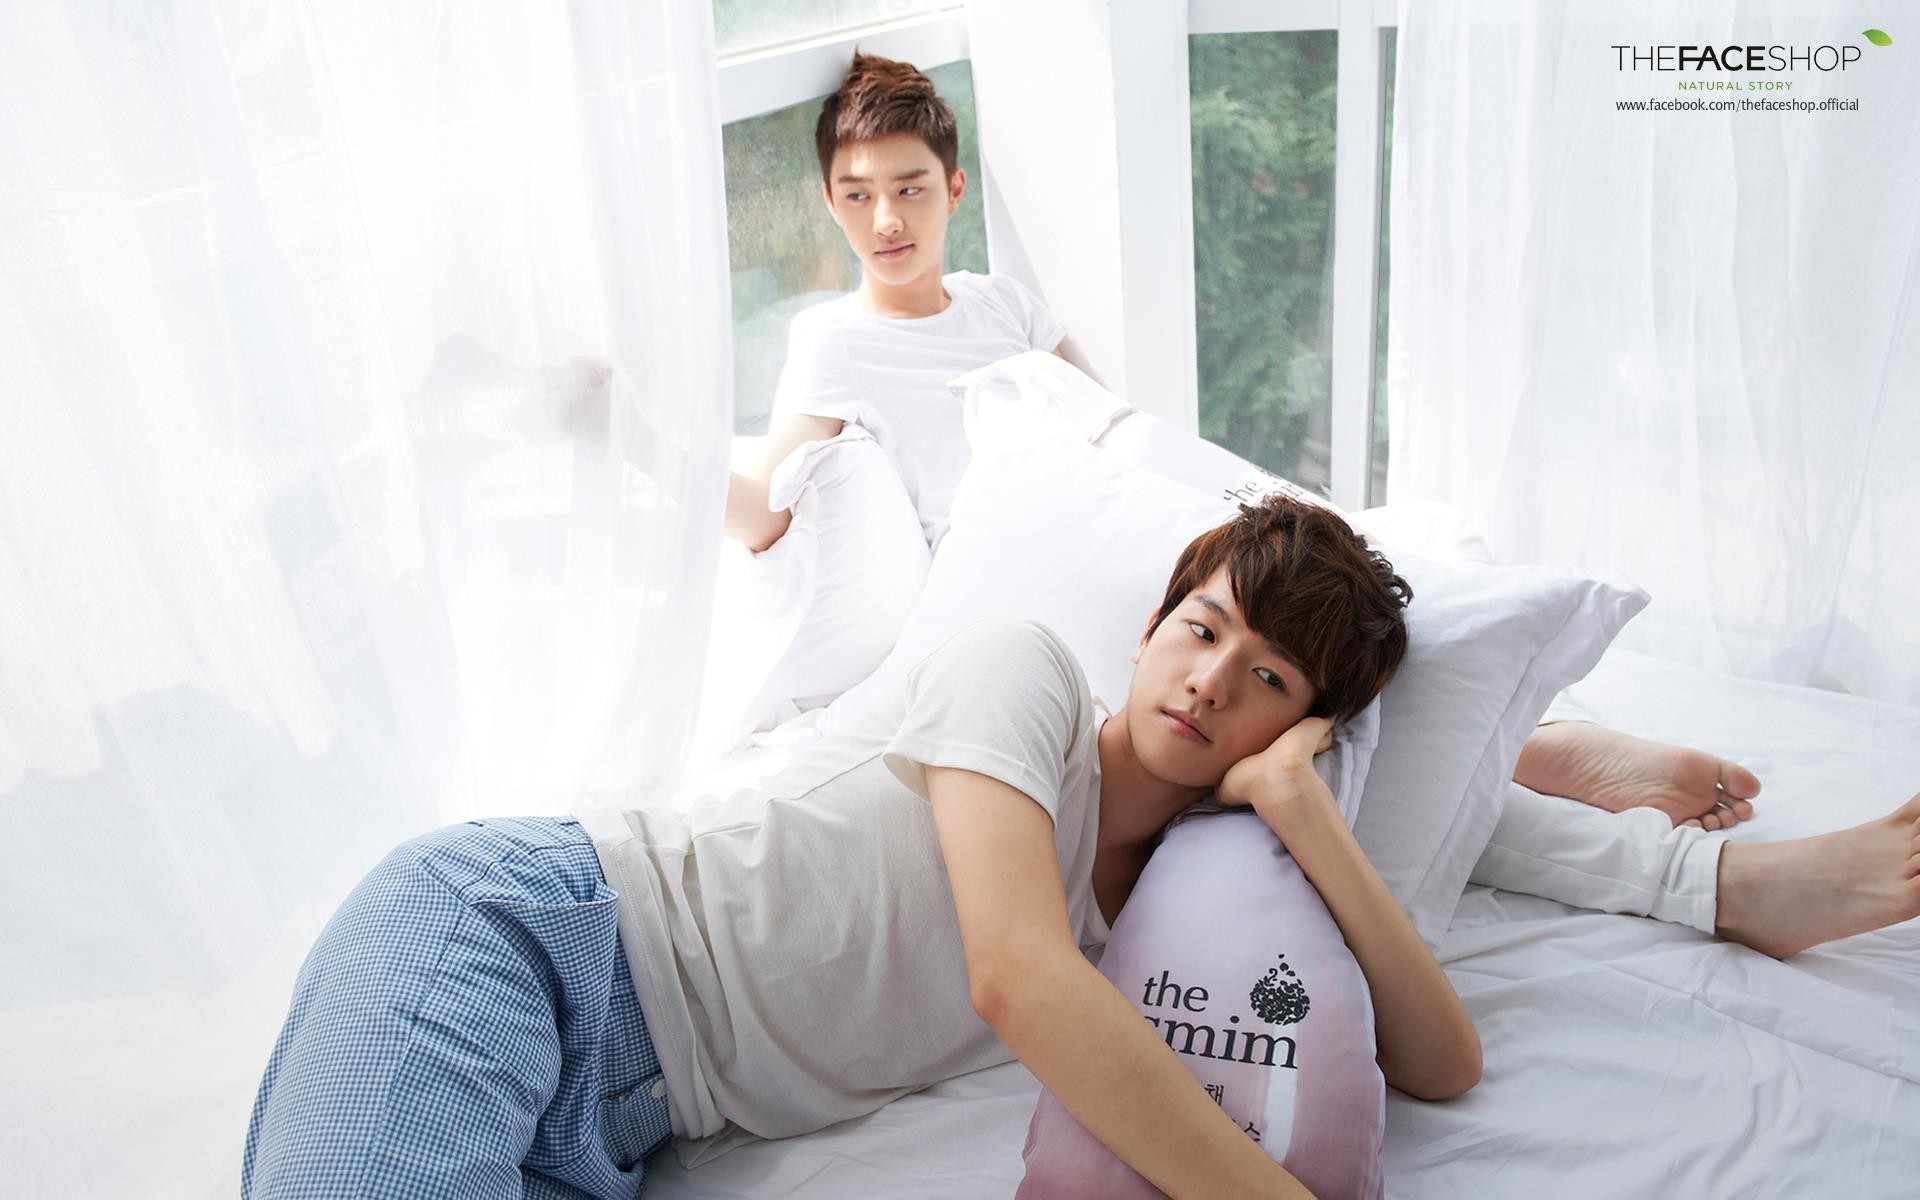 EXO K Baekhyun and D.O The Face Shop HD Wallpaper why are they on the same bed